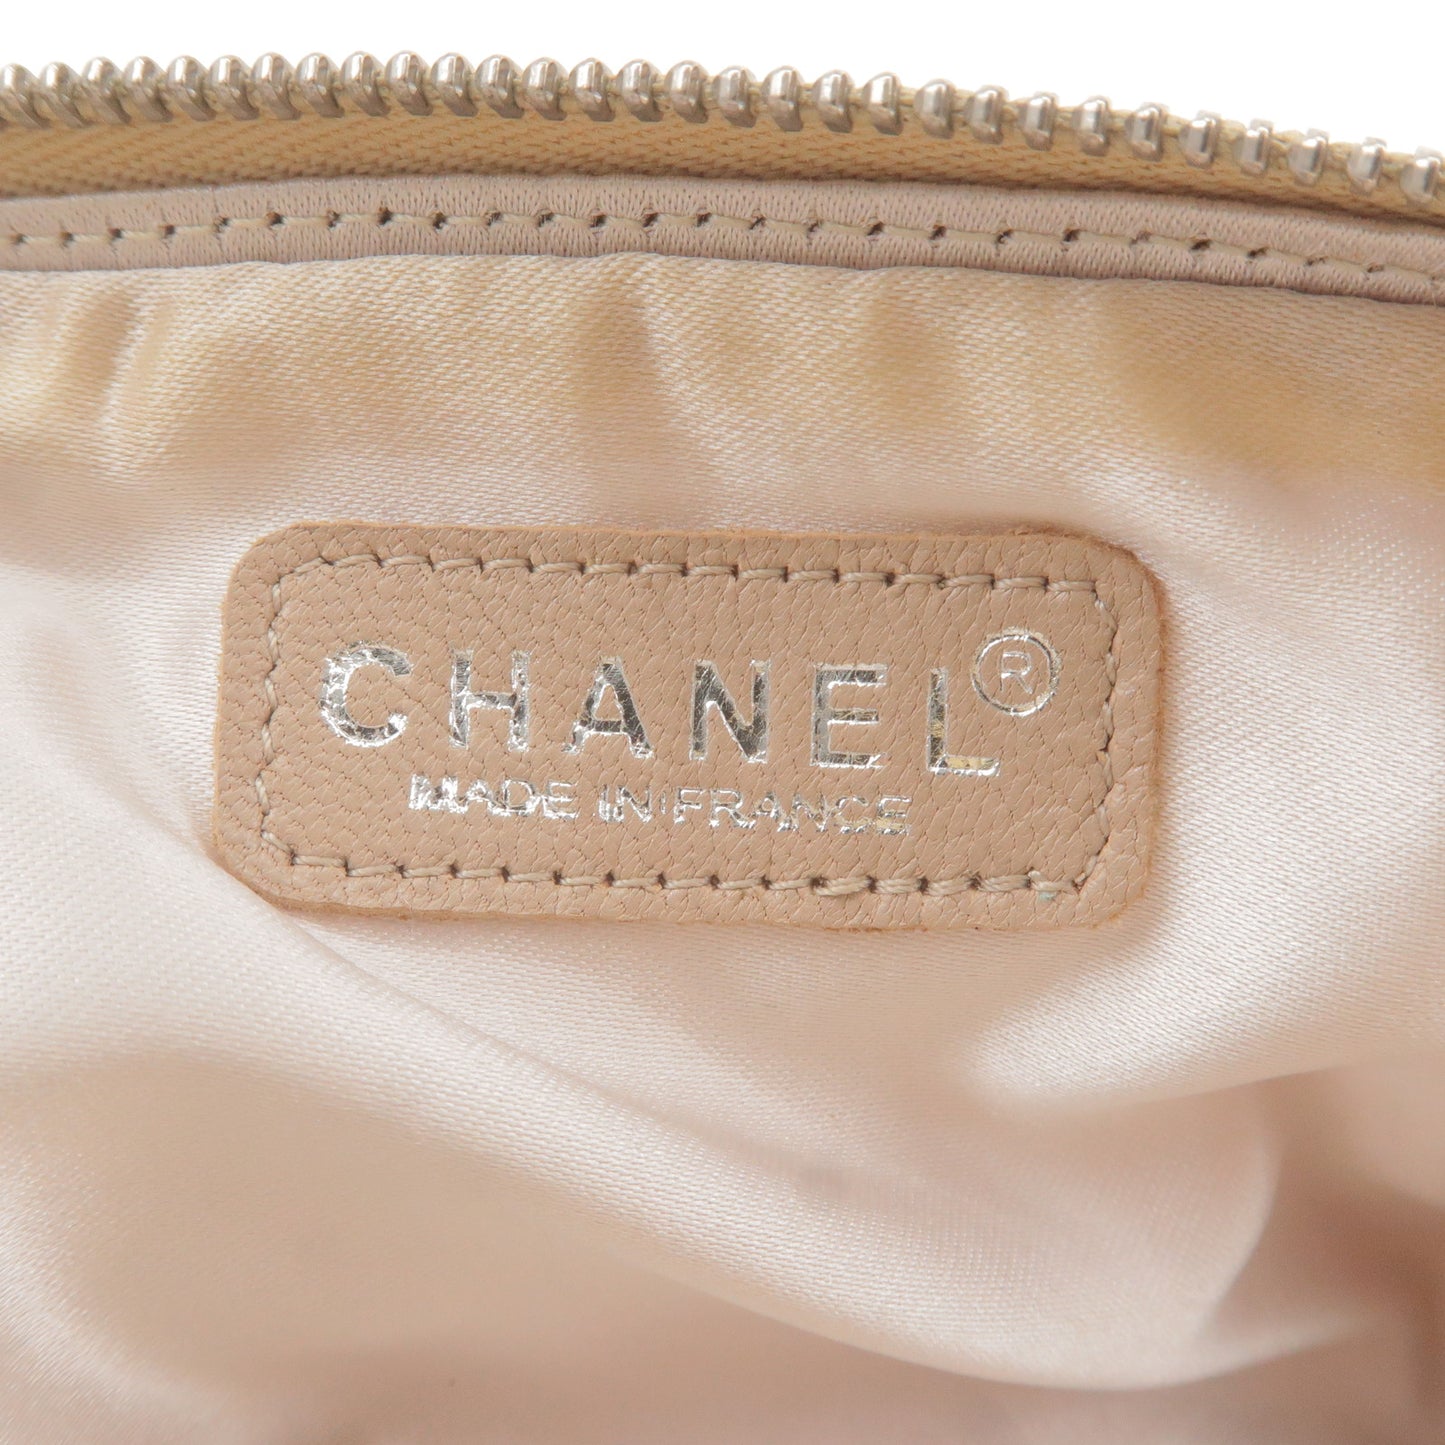 CHANEL New Travel Line Nylon Jacquard Cosmetic Pouch Beige